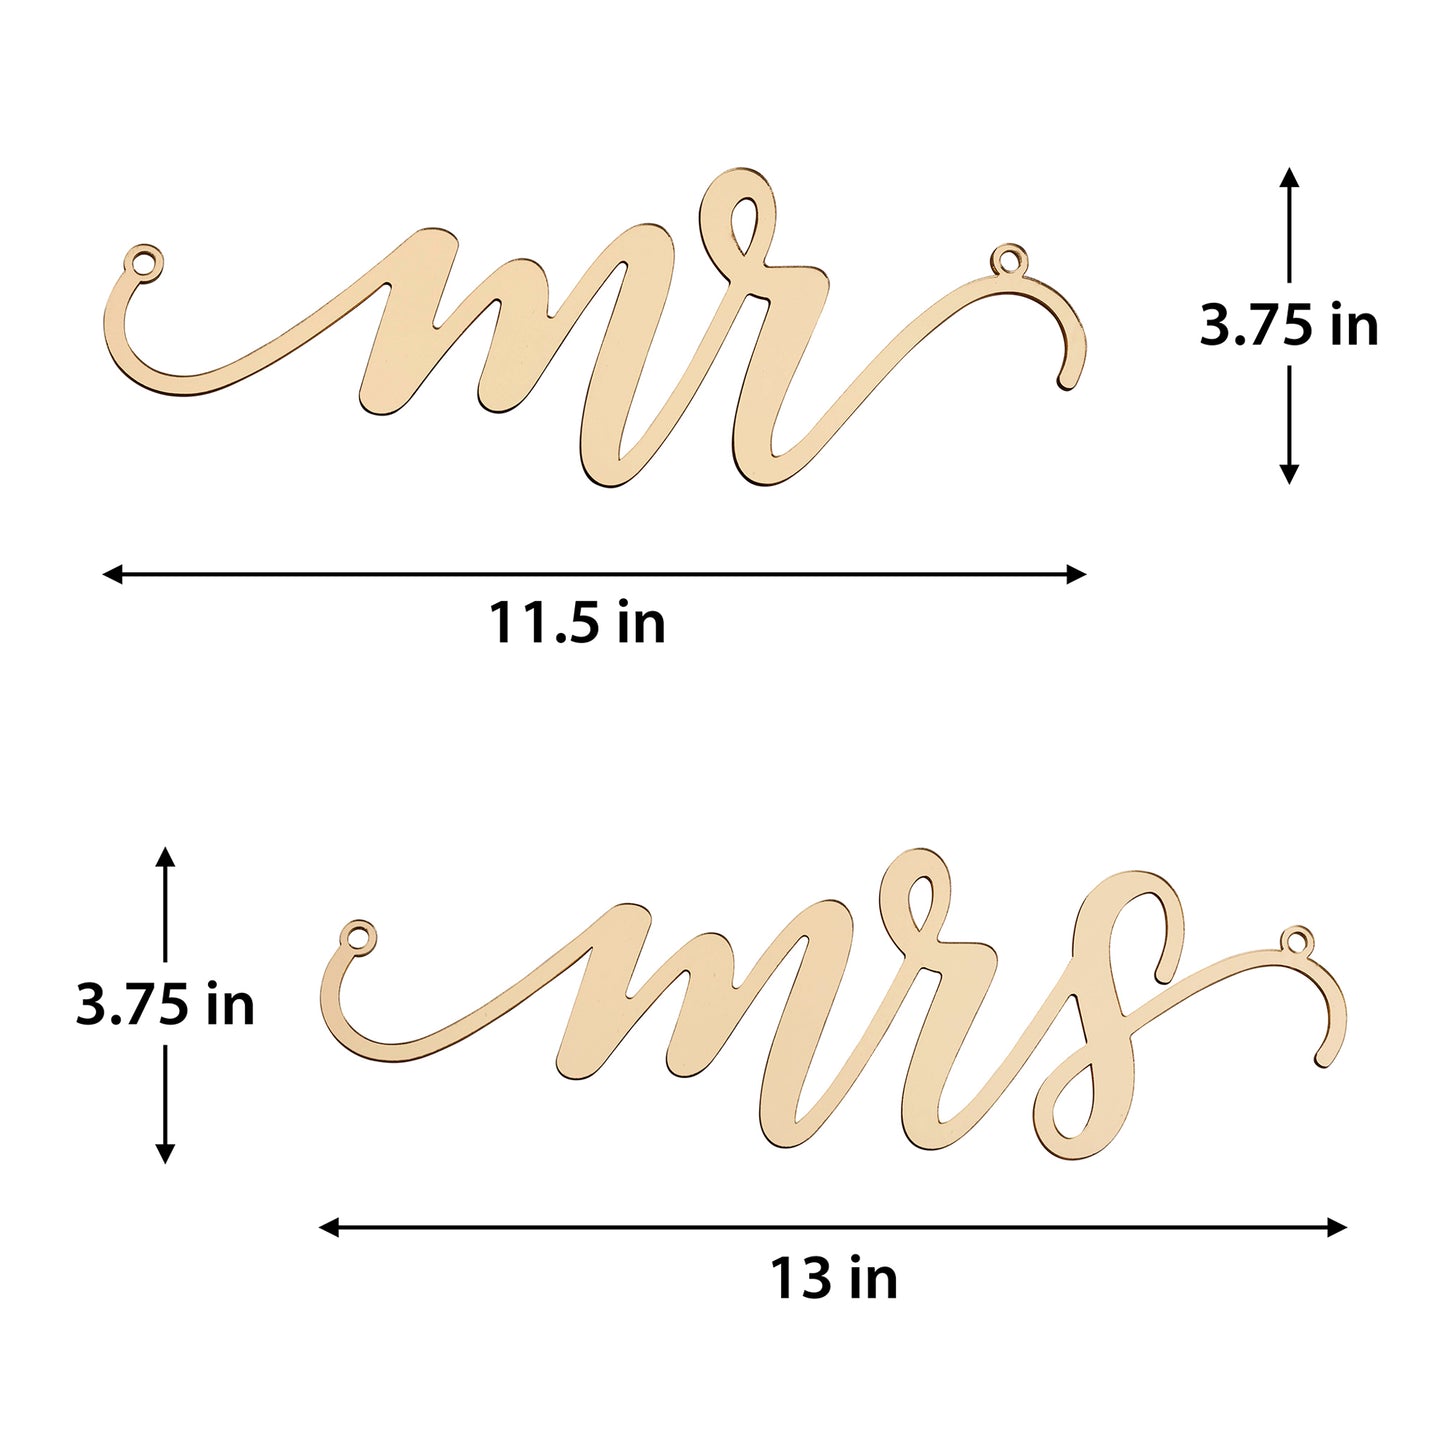 Mr & Mrs Gold Laser Cut Chair Signs